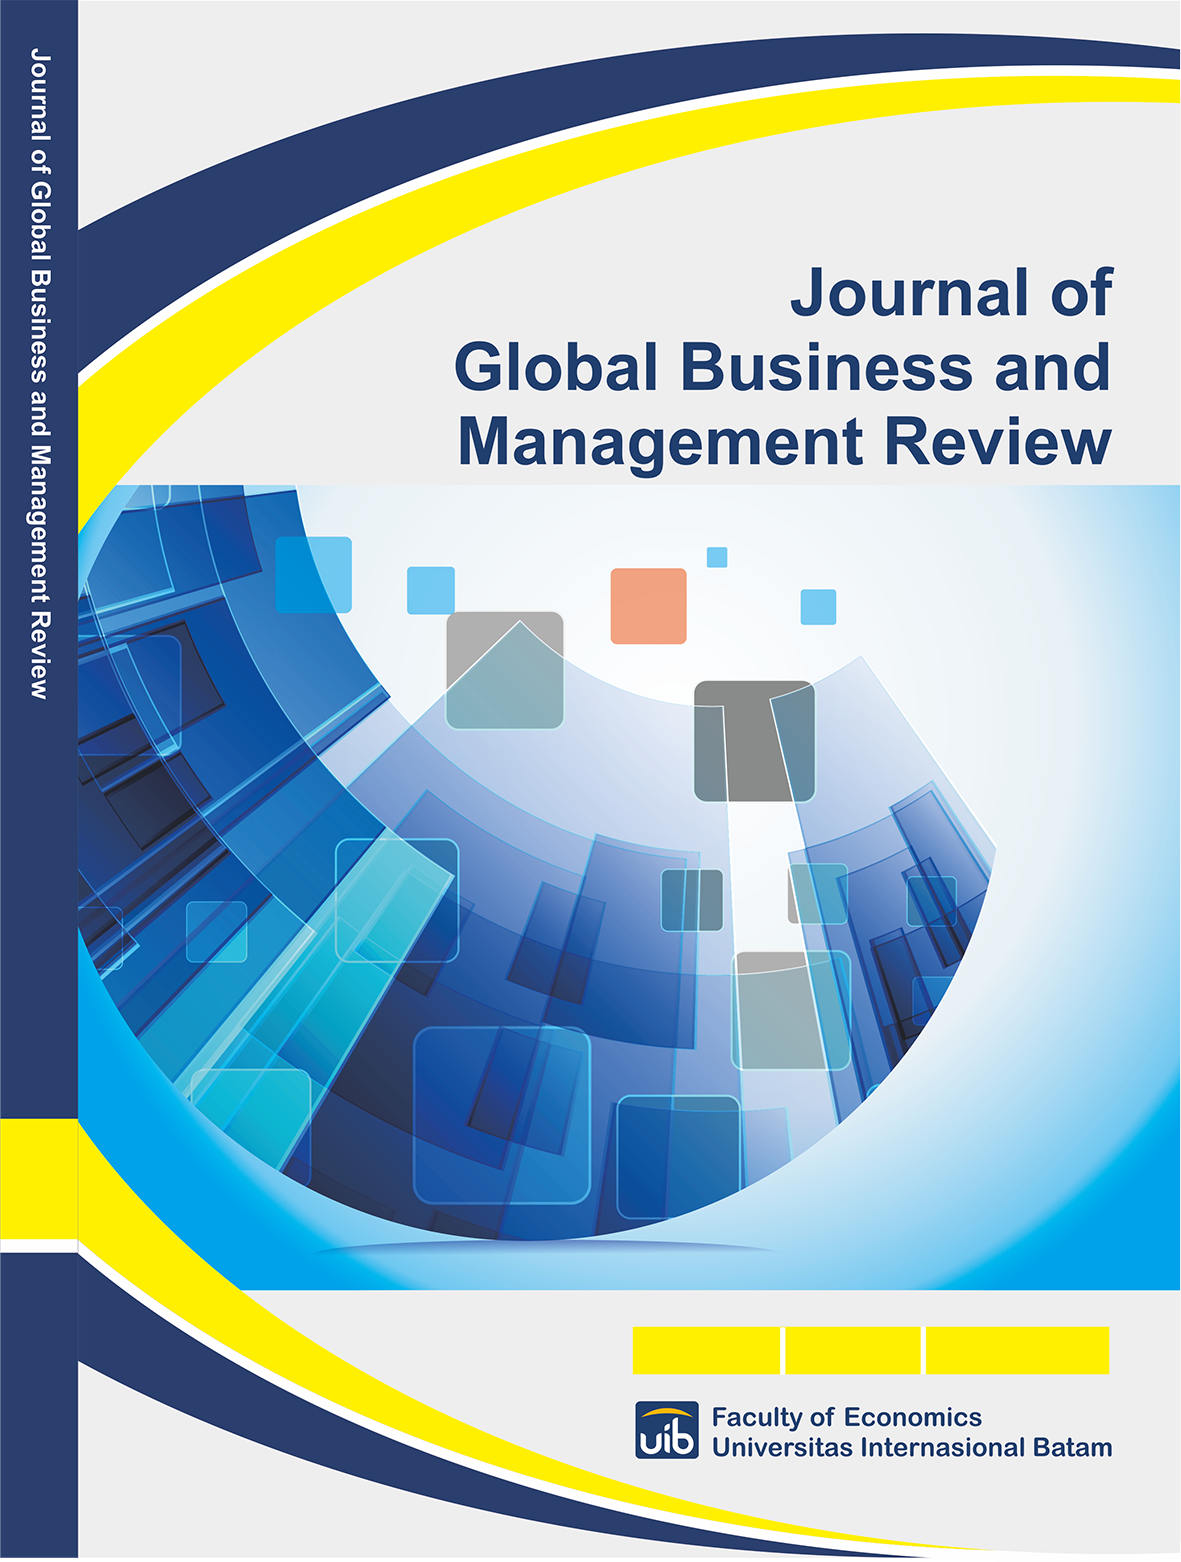 					View Vol. 3 No. 1 (2021): Journal of Global Business and Management Review
				